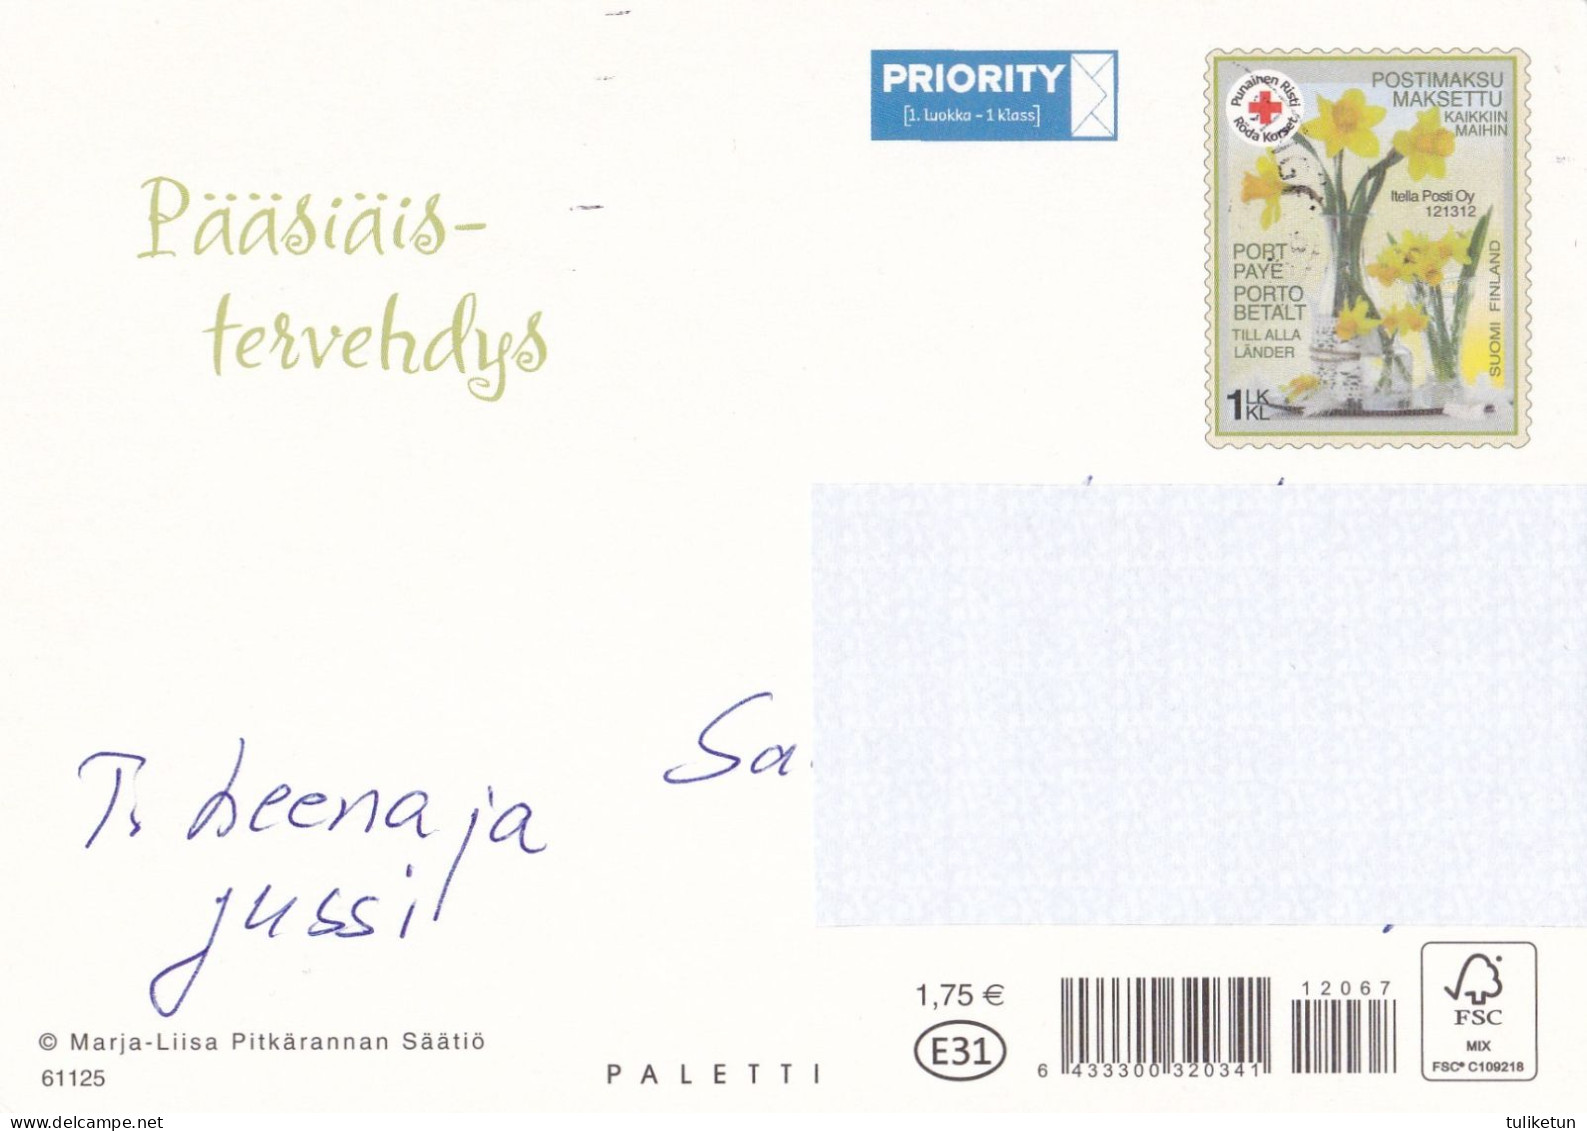 Postal Stationery - Flowers - Easter Witches - Trullis - Willows - Cat - Red Cross - Suomi Finland - Postage Paid - Interi Postali